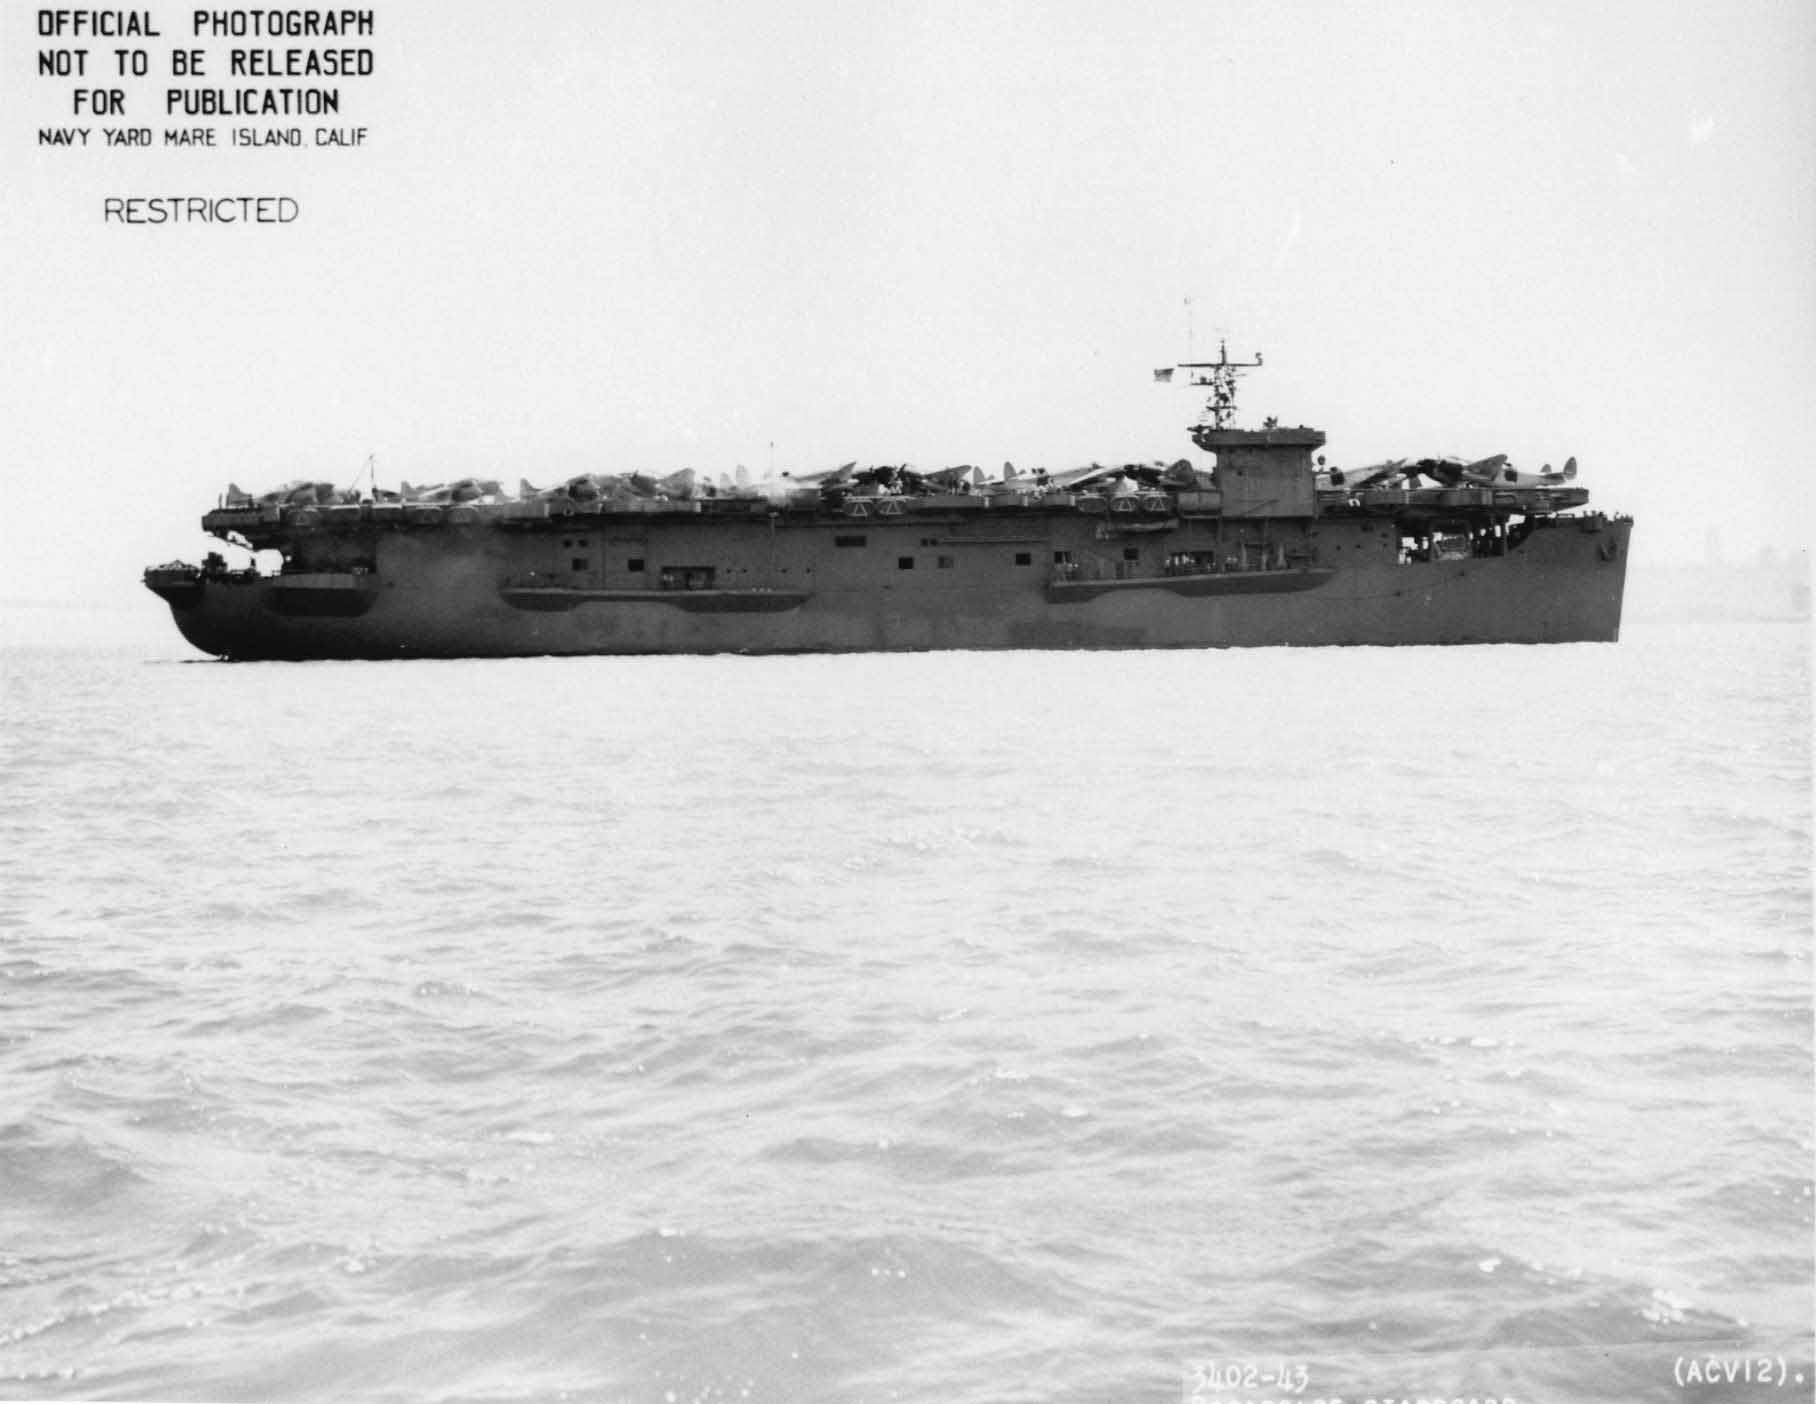 USS Copahee in San Francisco Bay, California, United States, 9 May 1943, photo 2 of 3; note TBD Devastator and PV-1 Ventura aircraft on flight deck